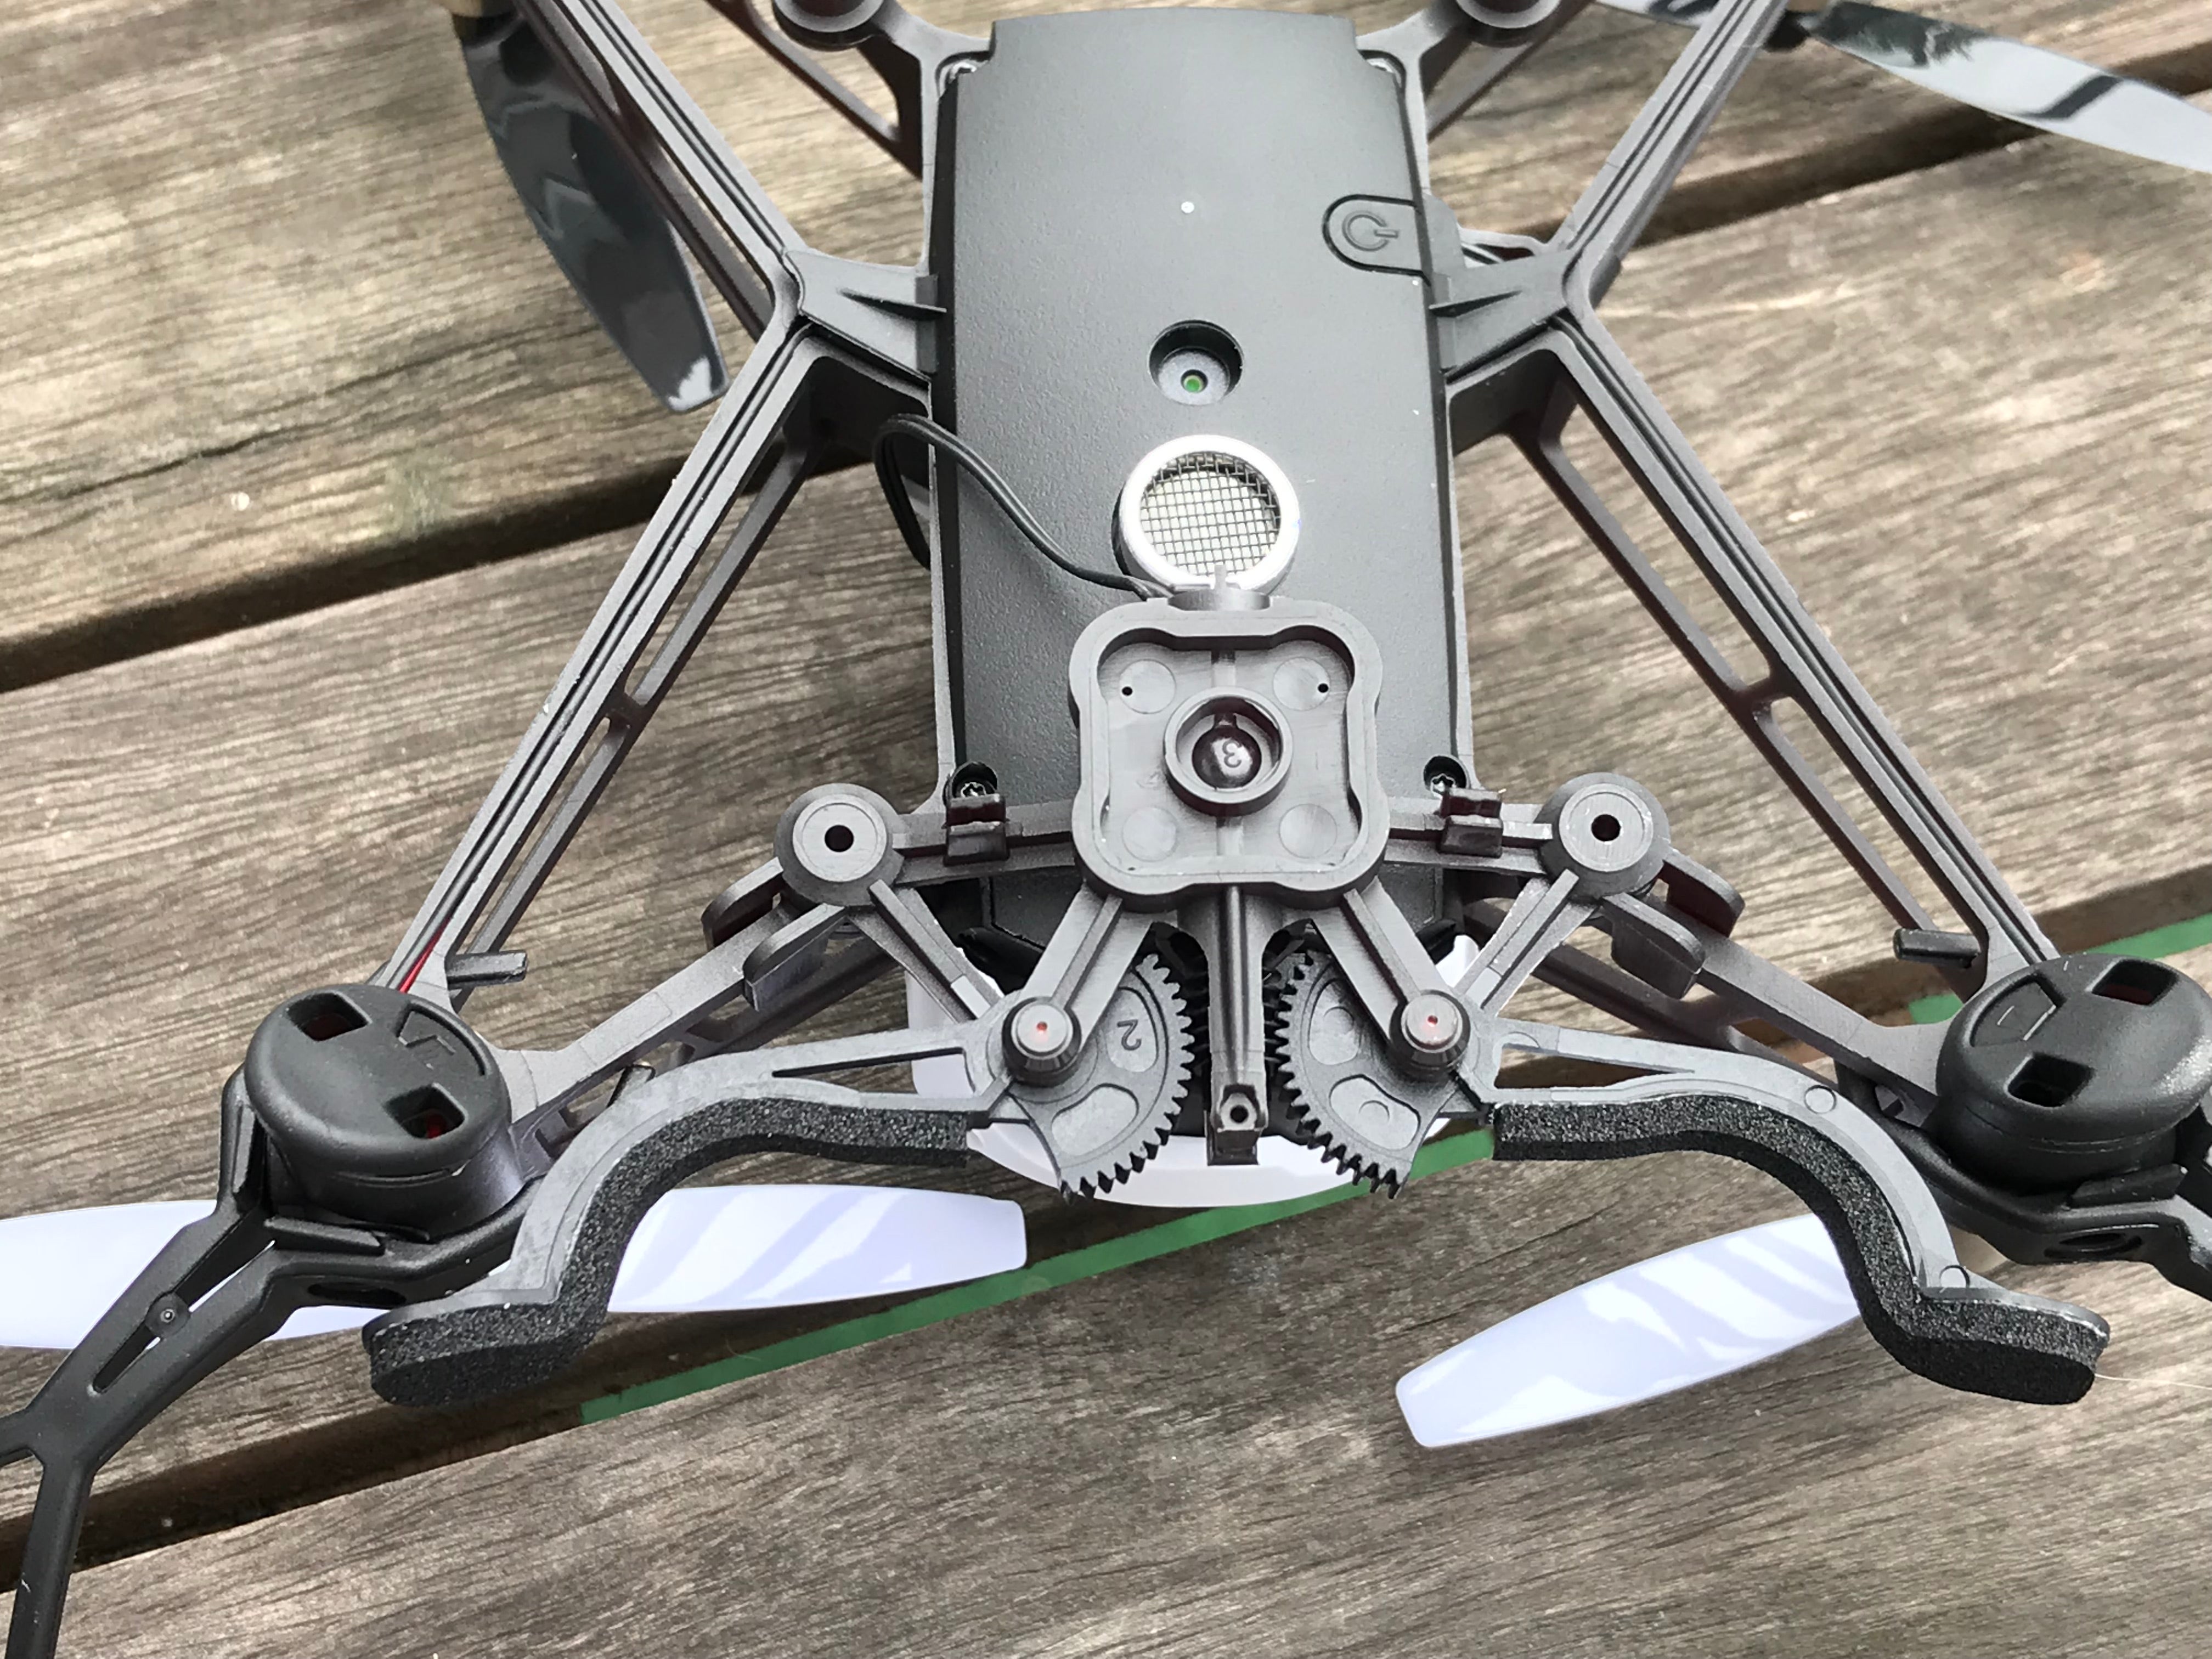 Close-up of a Parrot Mambo drone's undercarriage and gears.